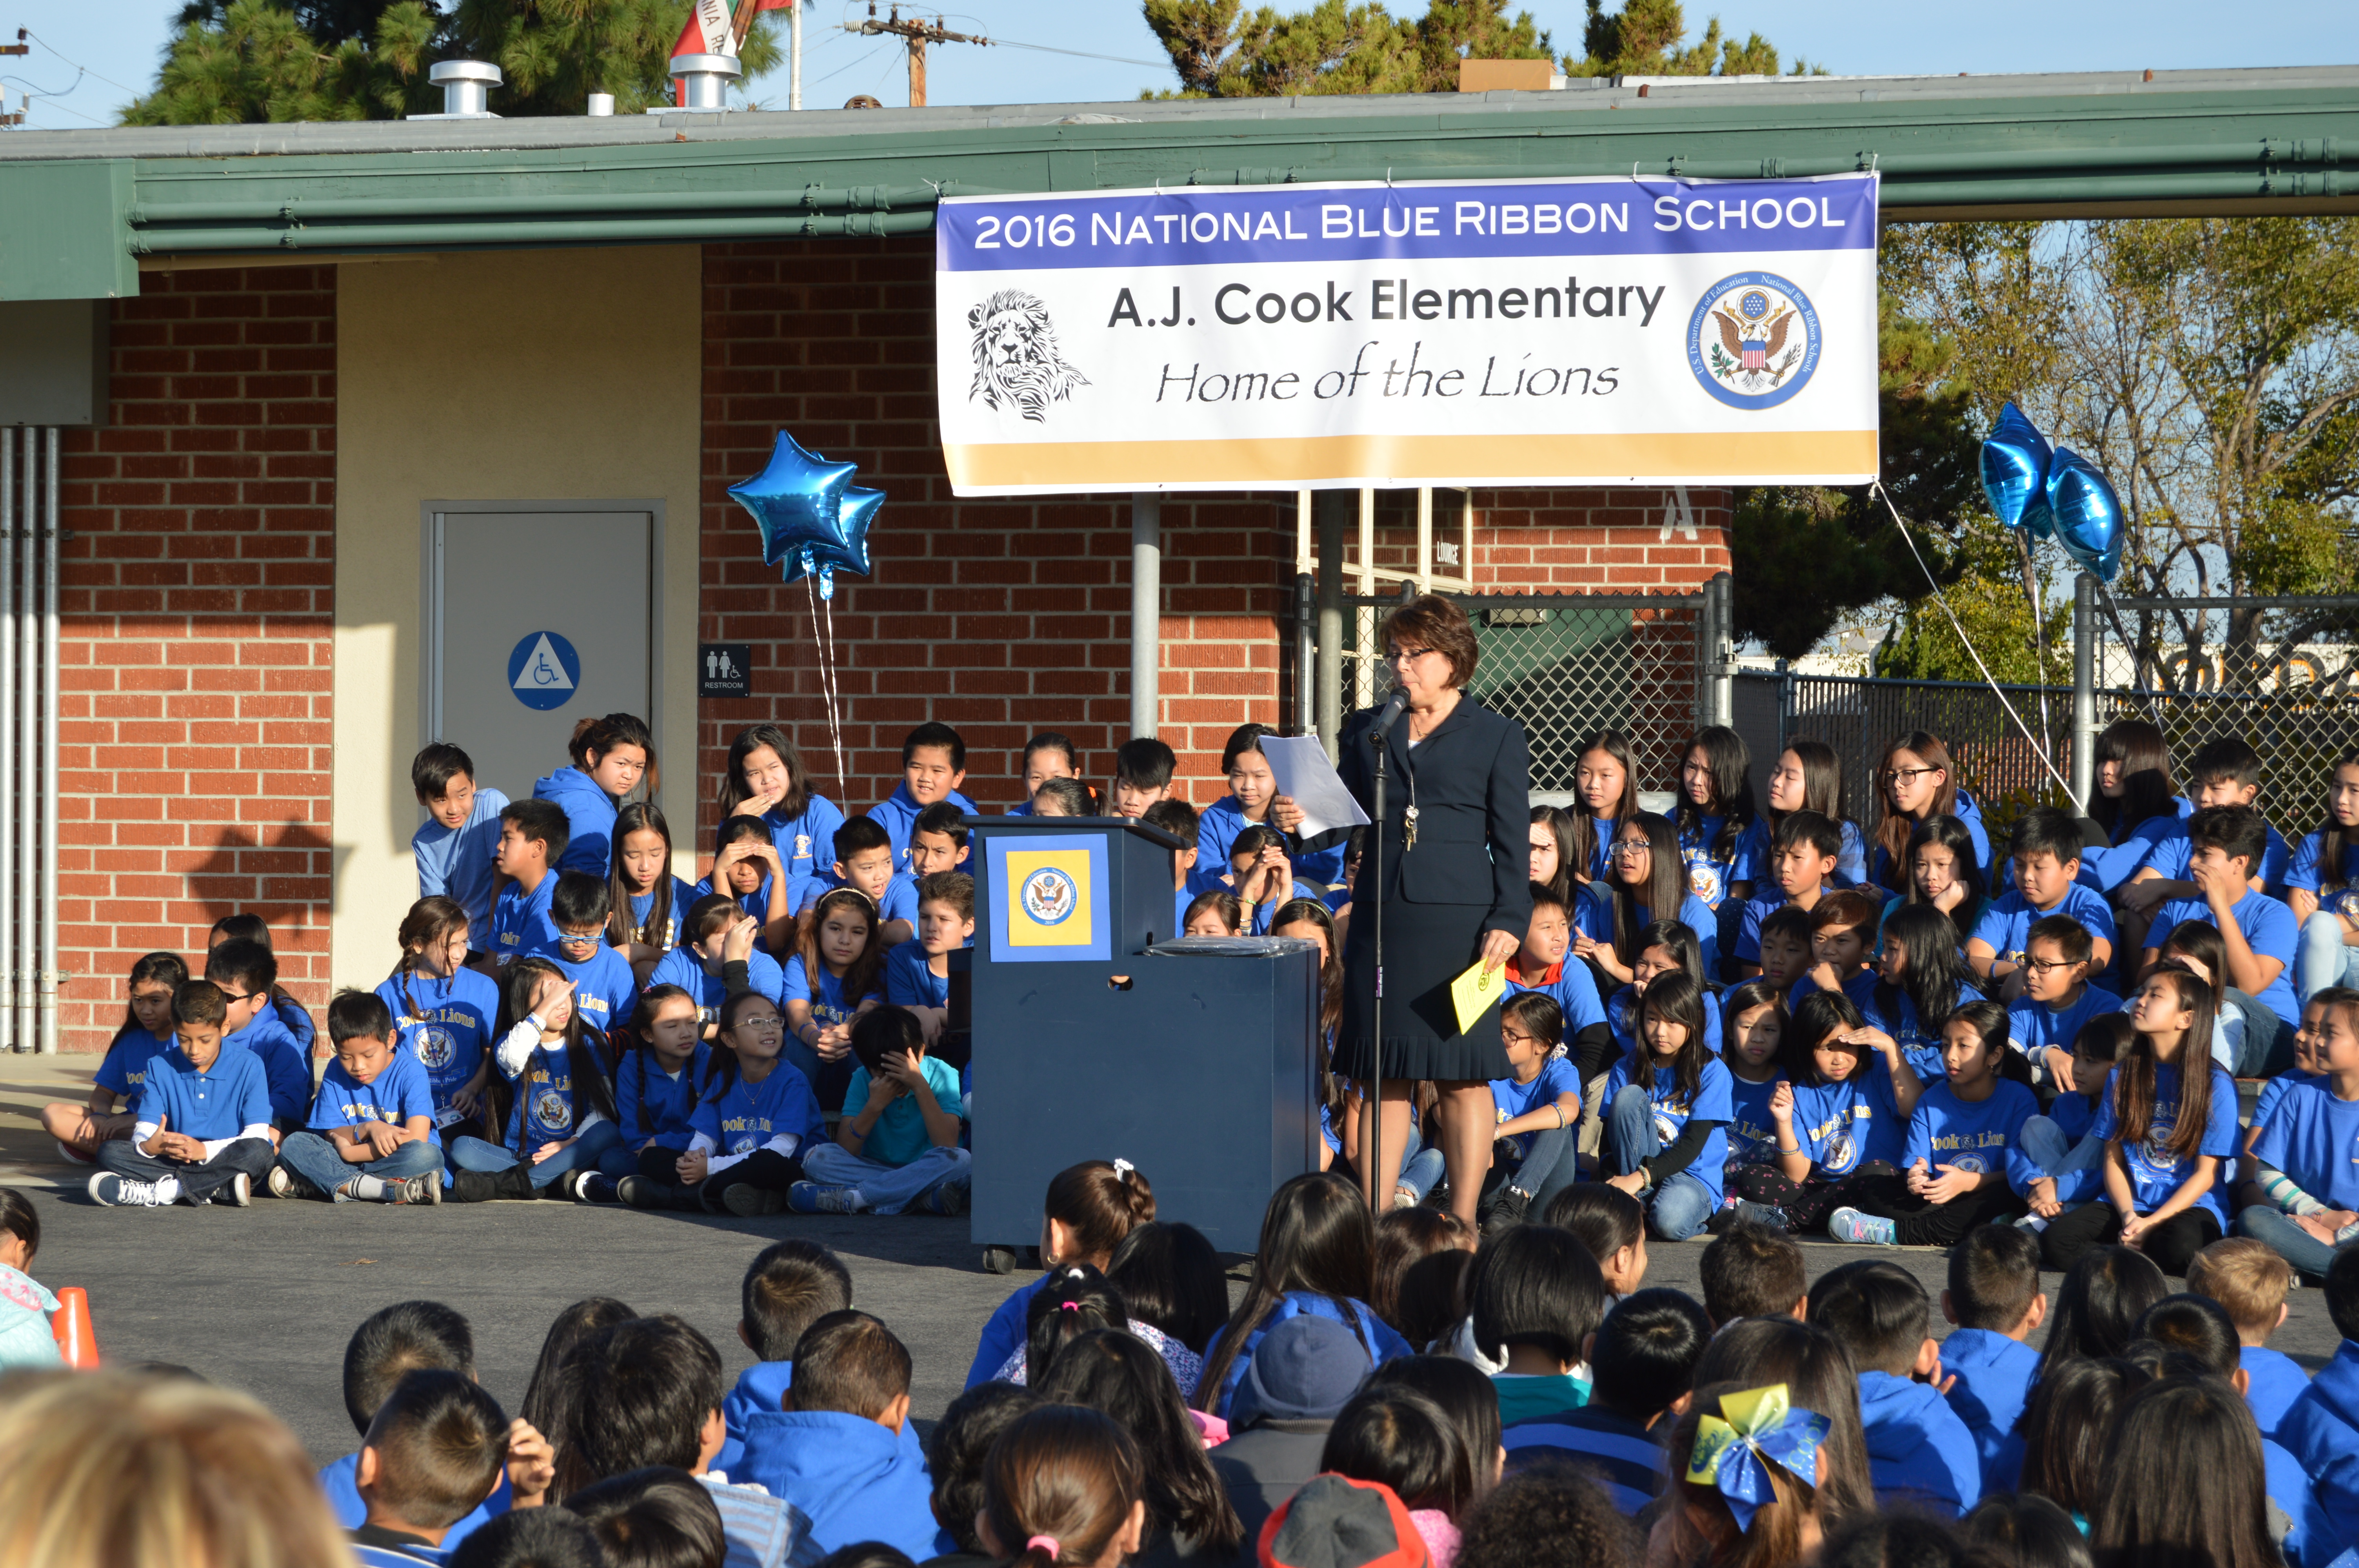 The principal of Cook Elementary School leads an outdoor assembly